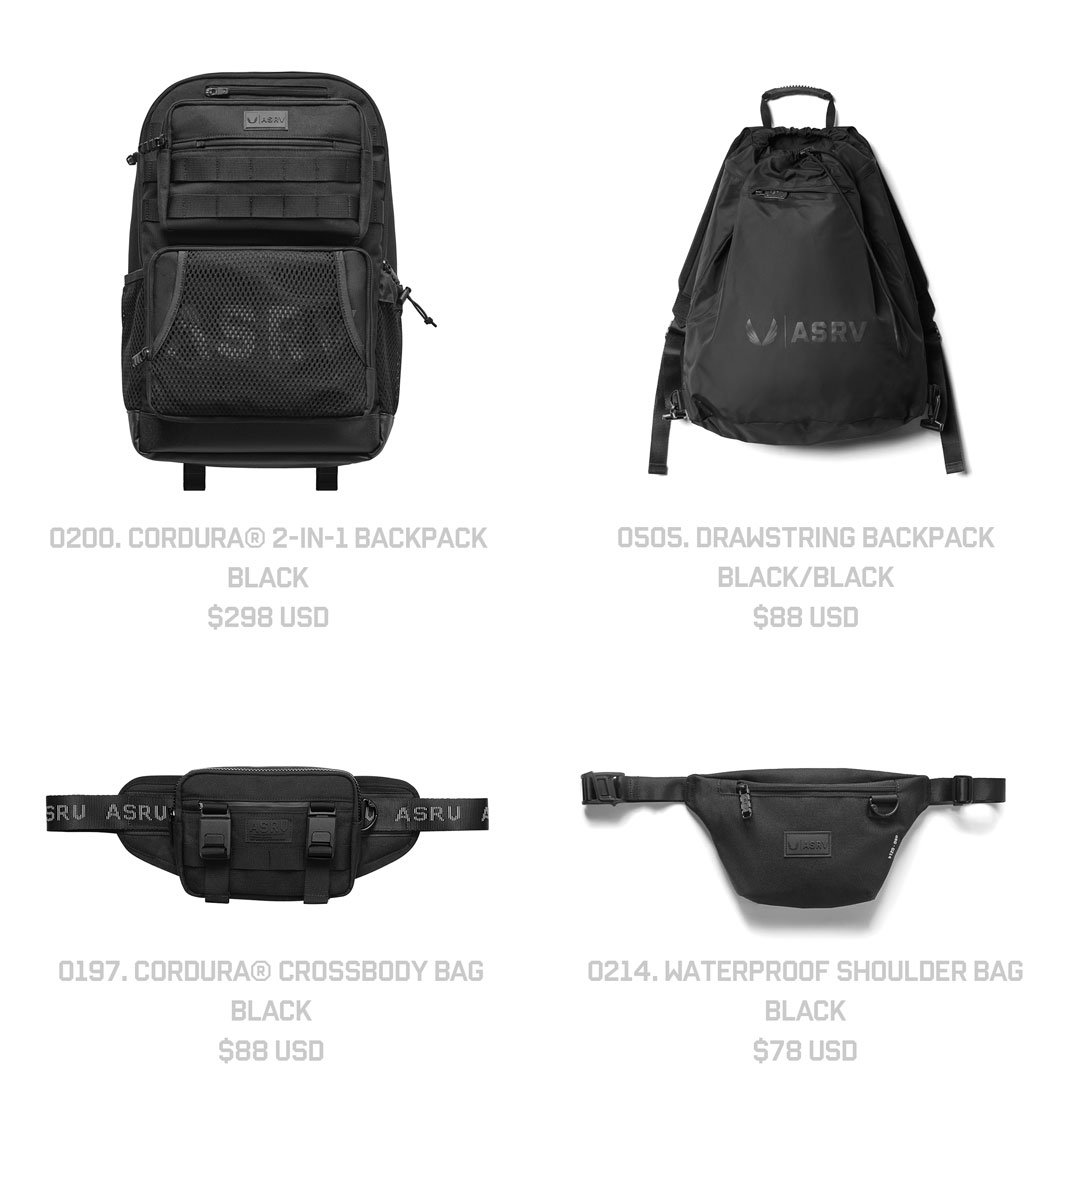 The Waterproof Rec Drawstring Backpack [ DSG. 0505 ] Constructed